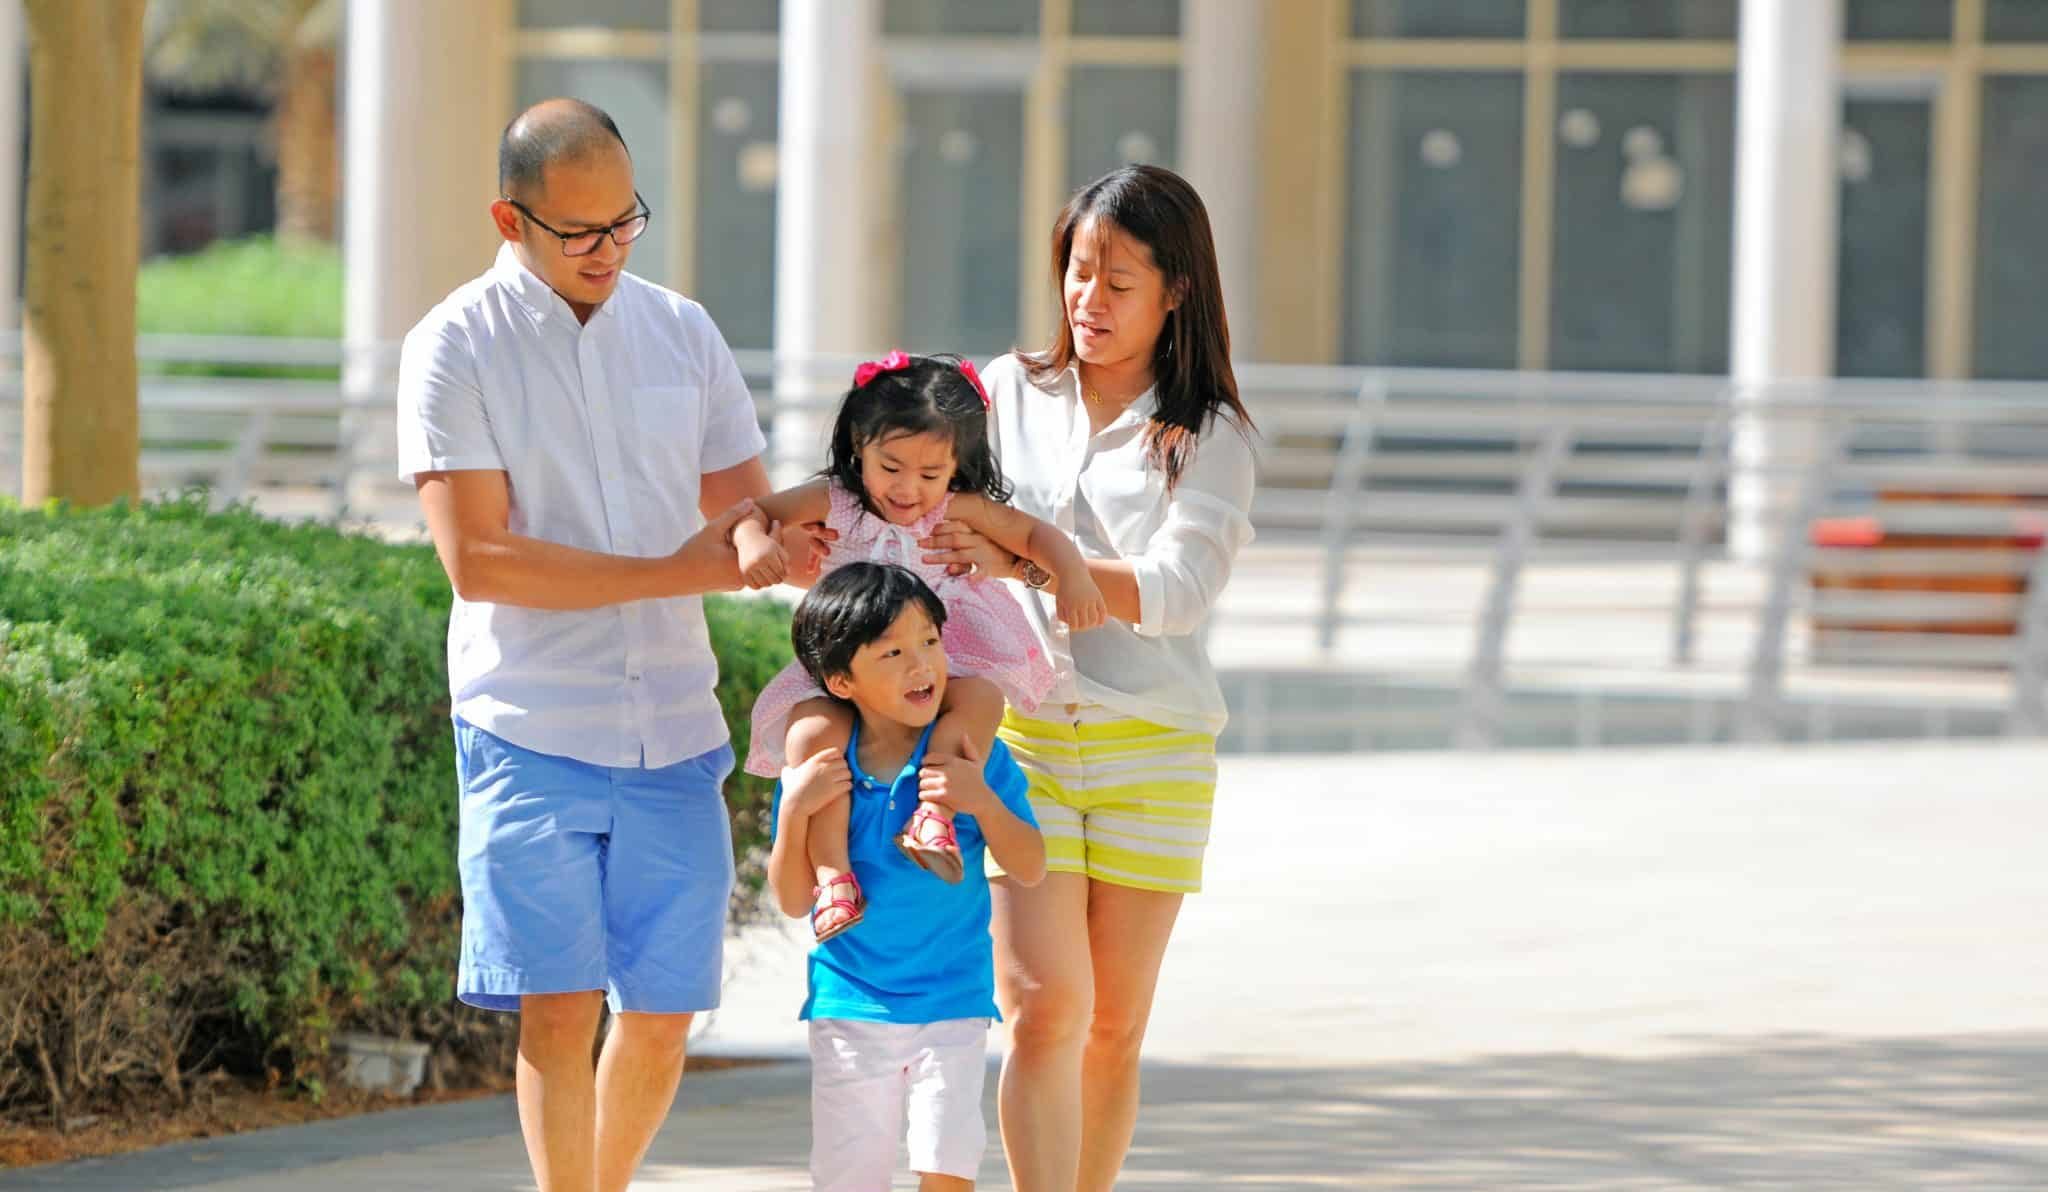 USED family 3 - Photo by Paolo De Guzman from Pexels